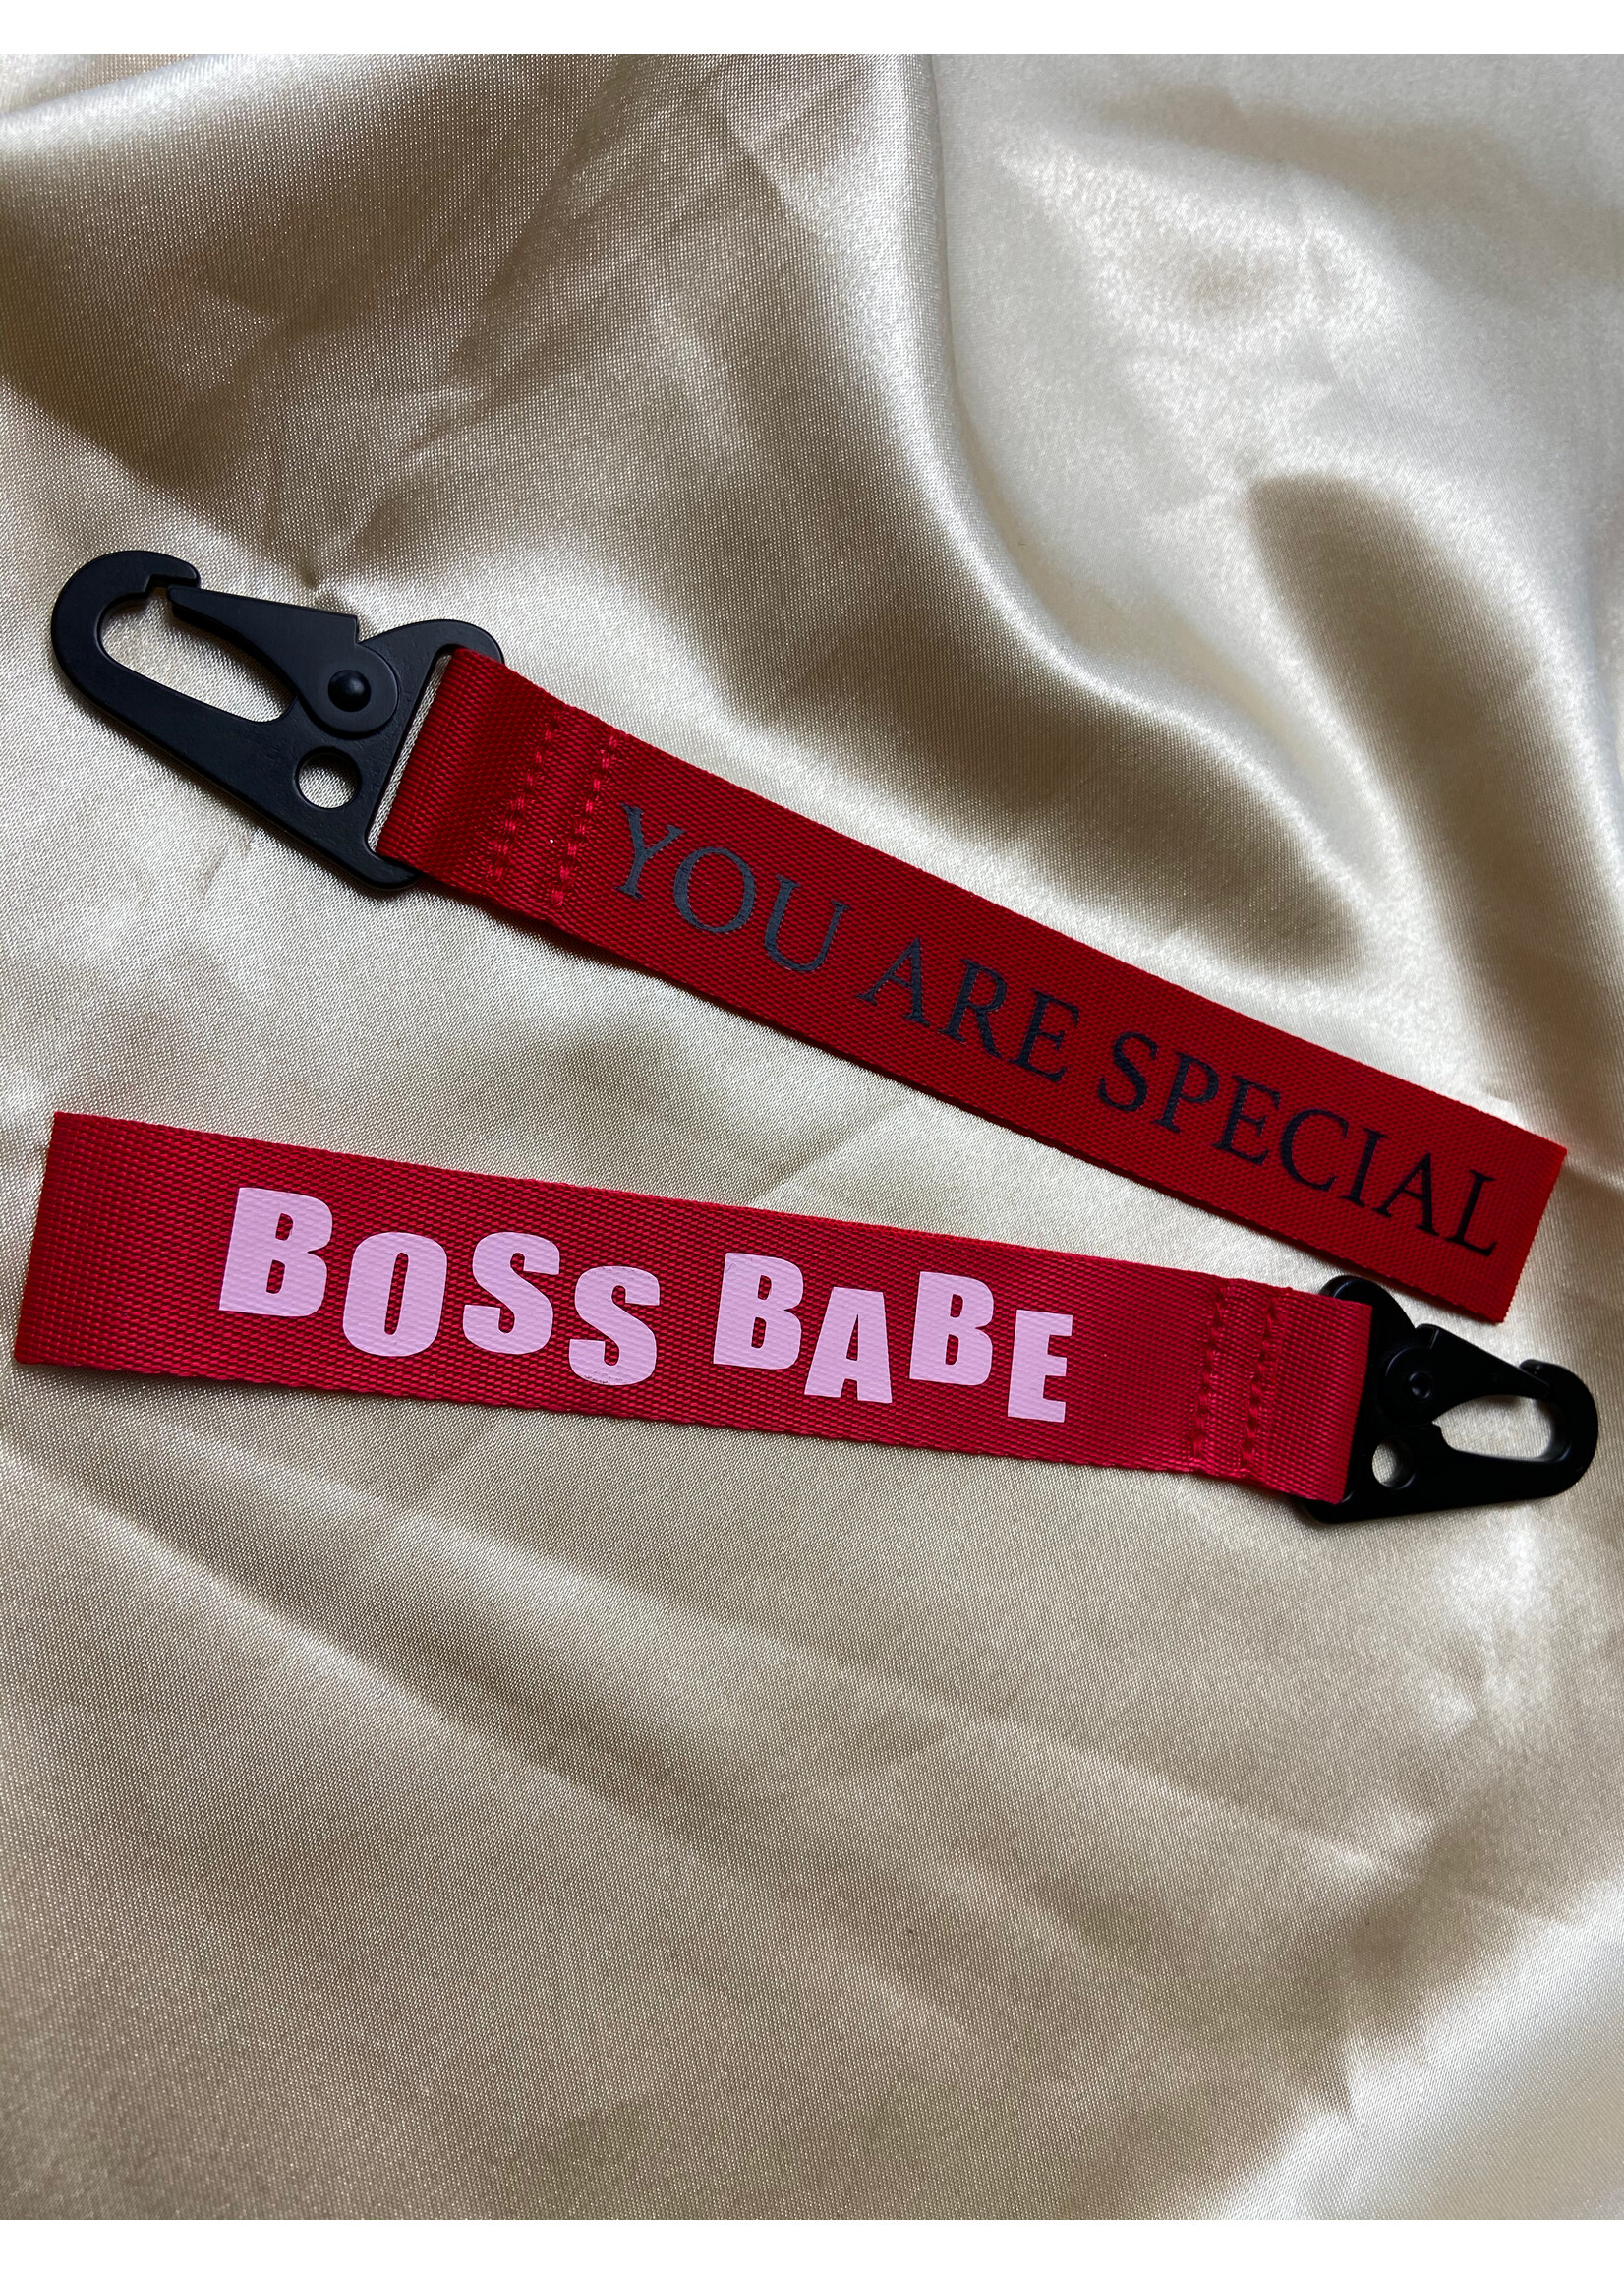 YOU ARE SPECIAL "BOSS BABE" Red Keychain